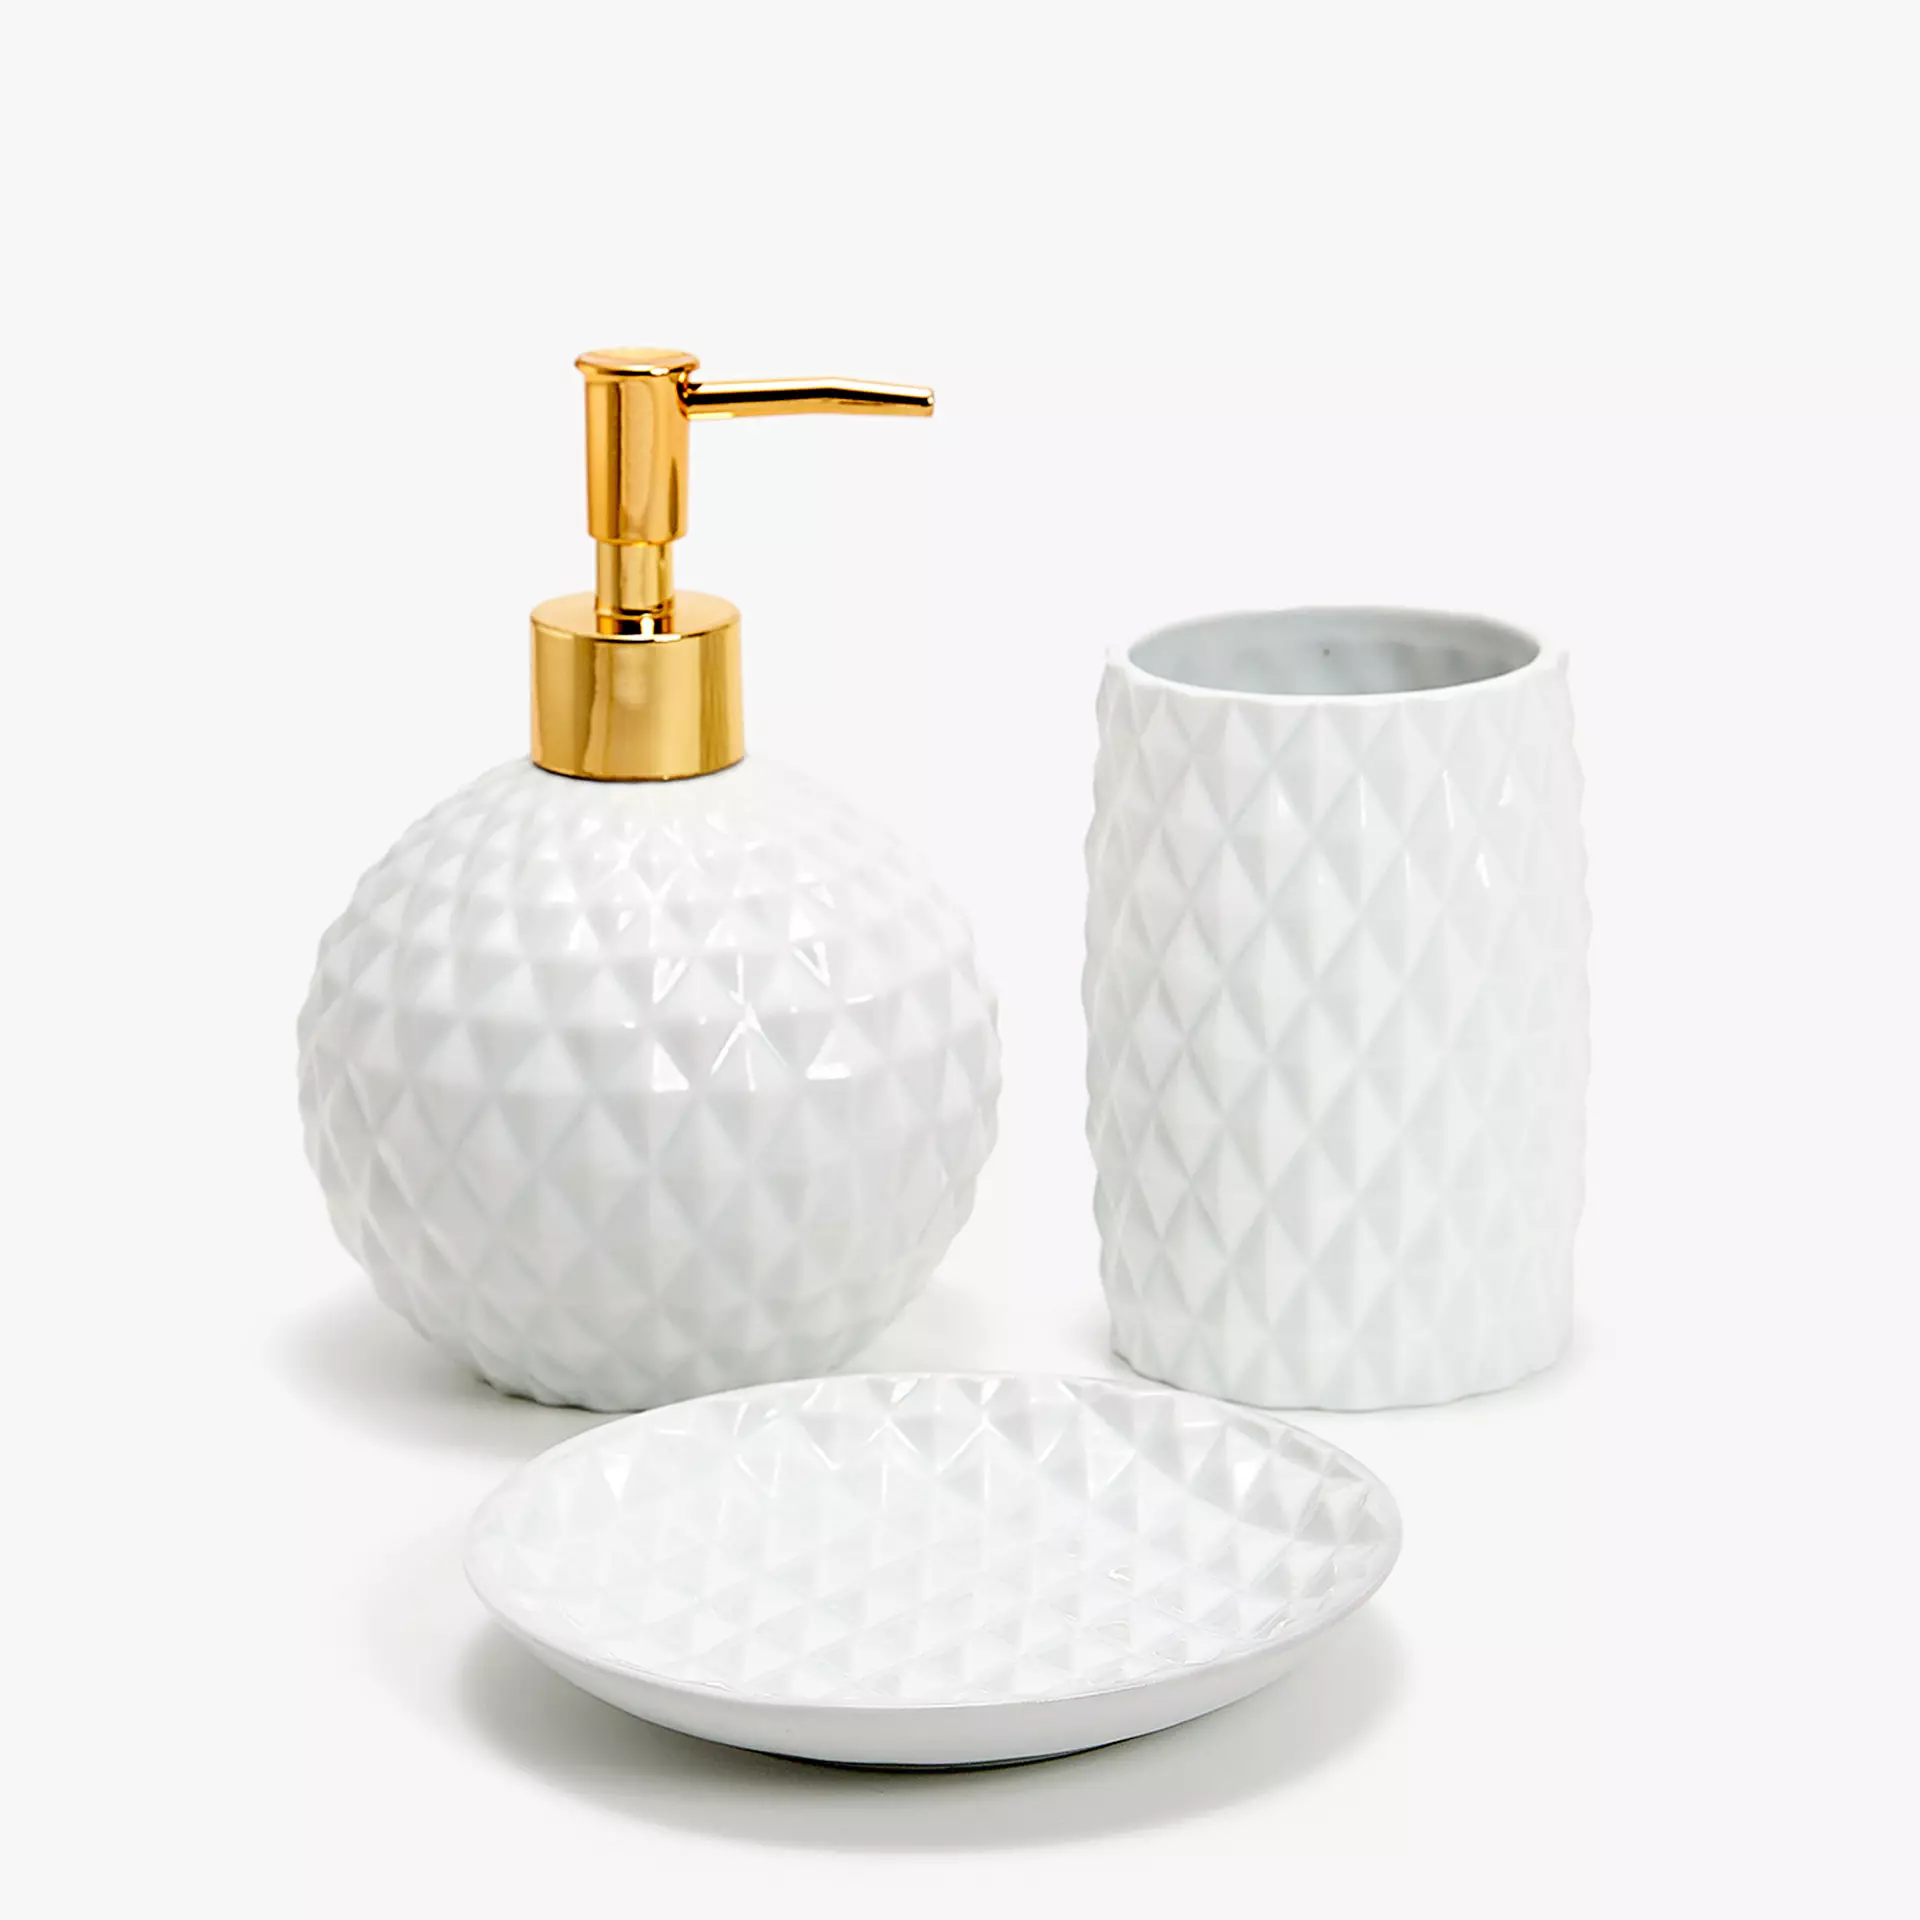 Festive mood: a selection of cool interior gifts for the new year